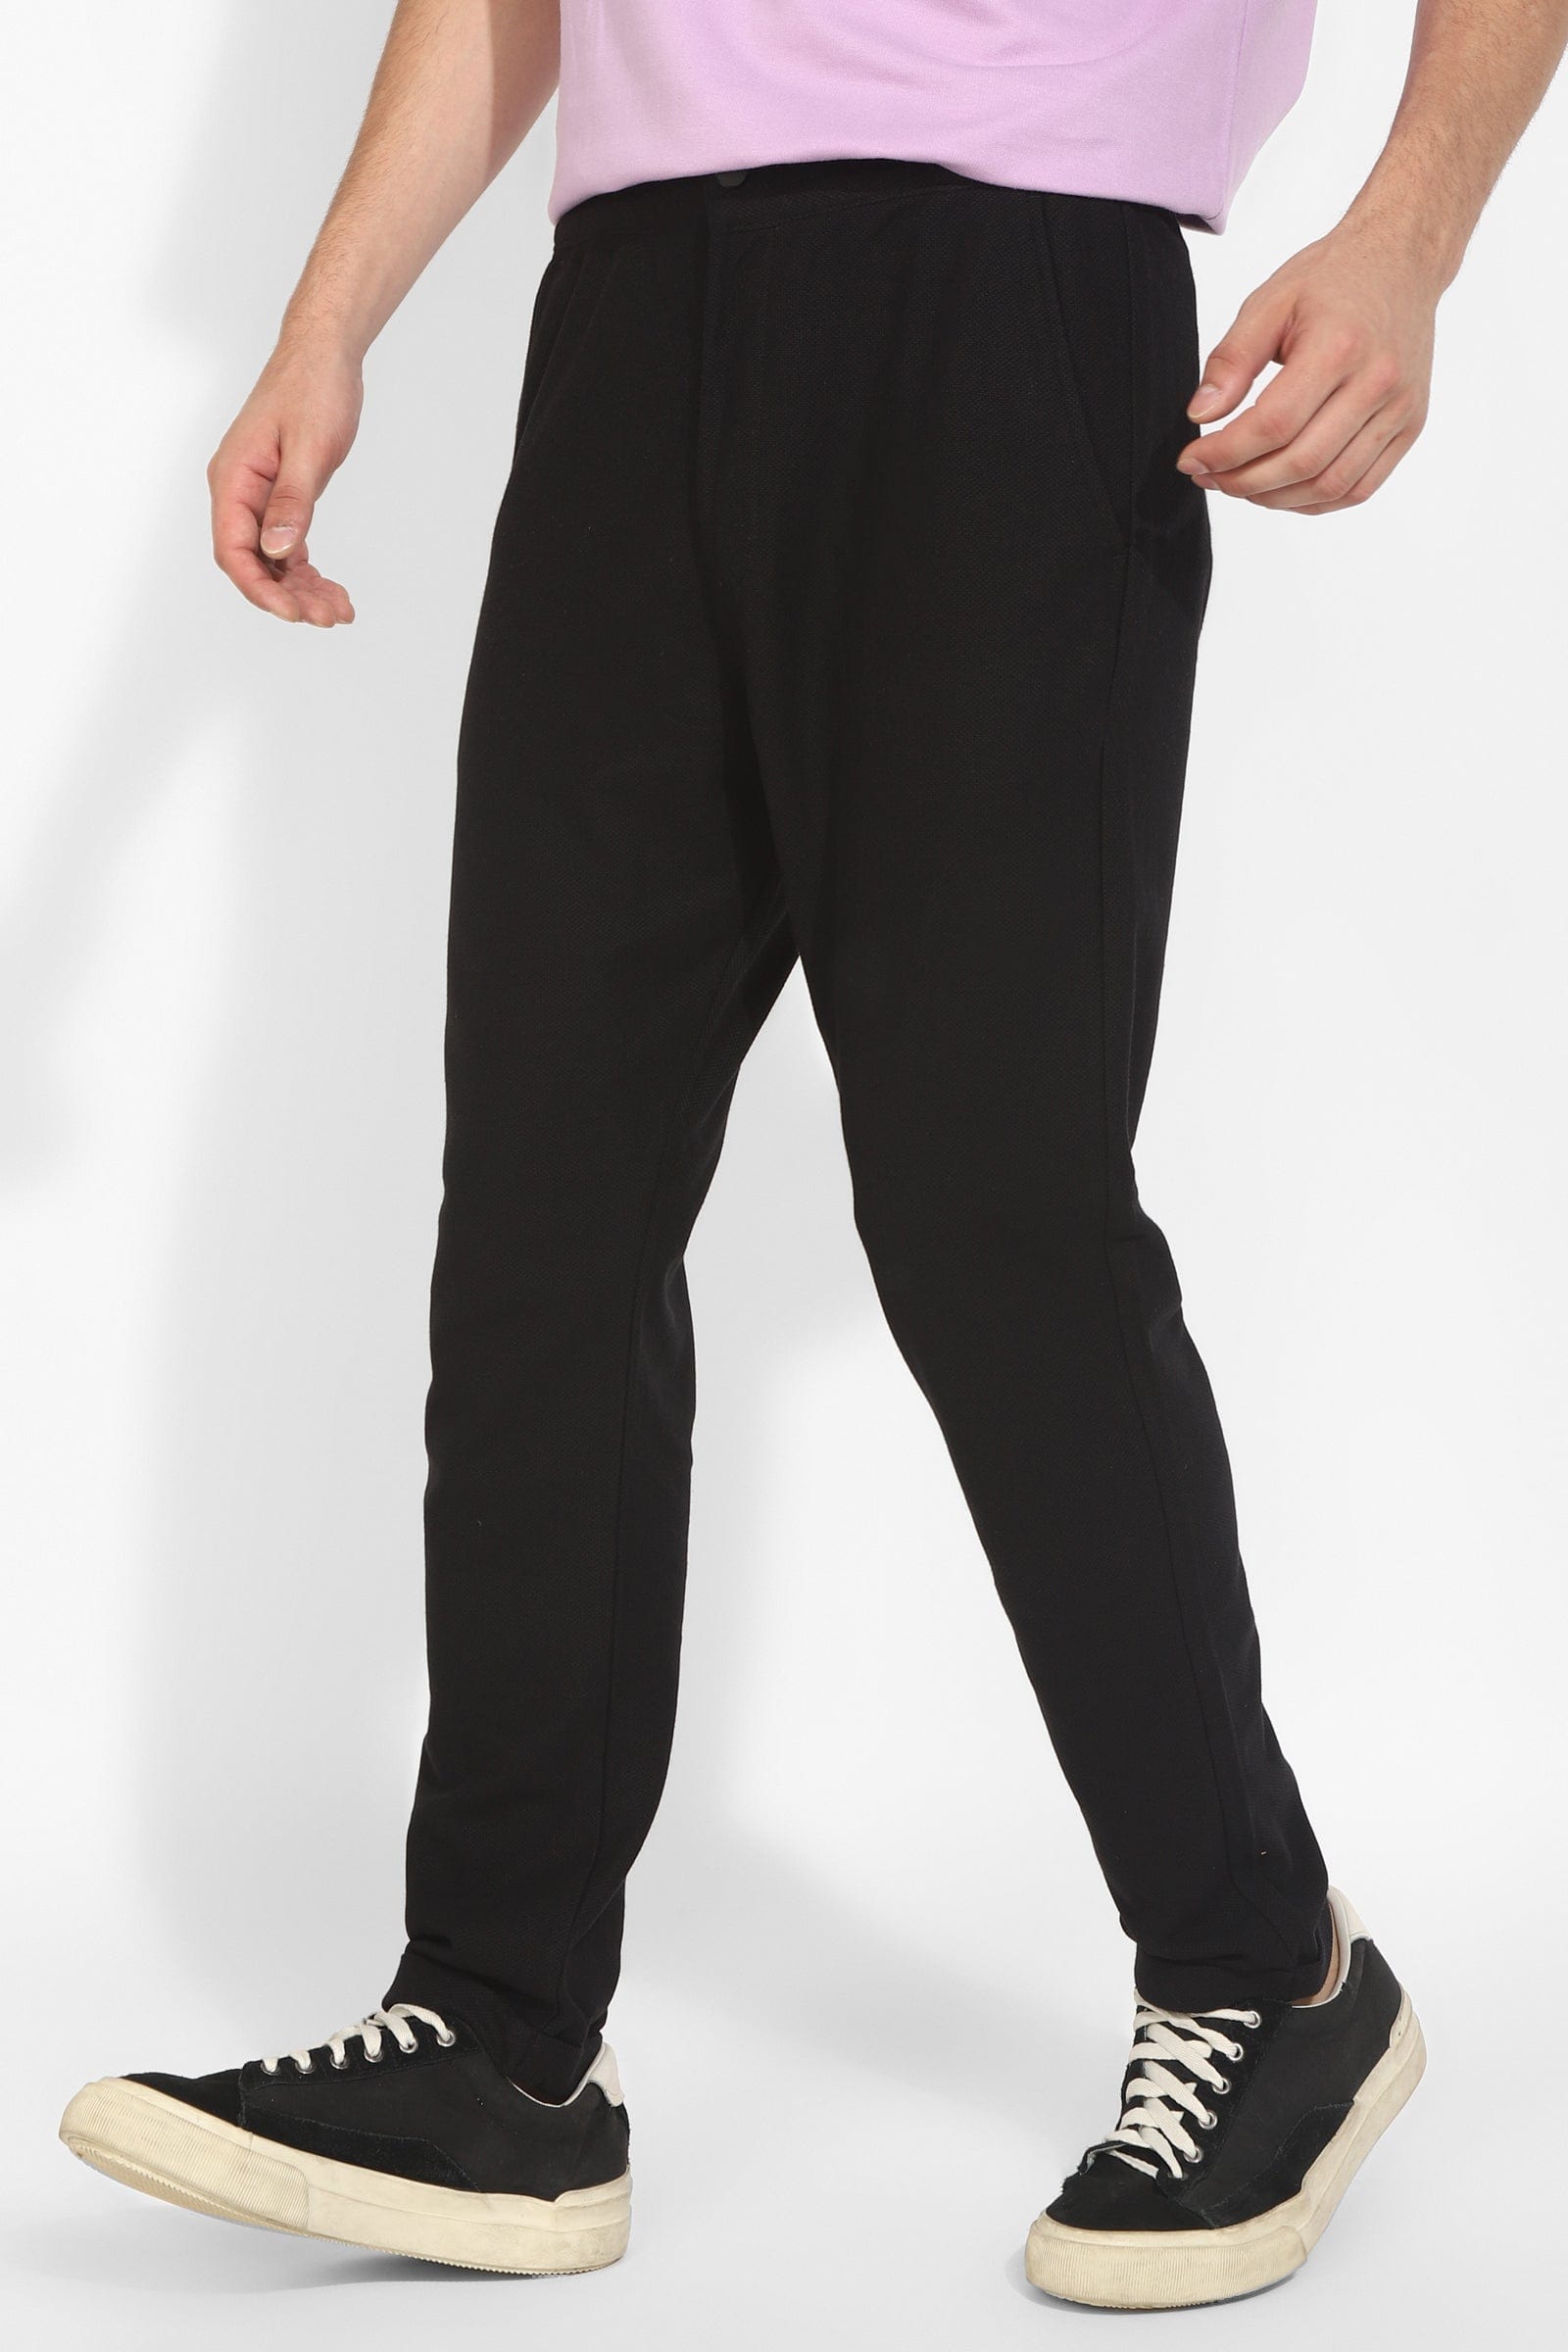 Black Knitted Trousers By Purple Mango